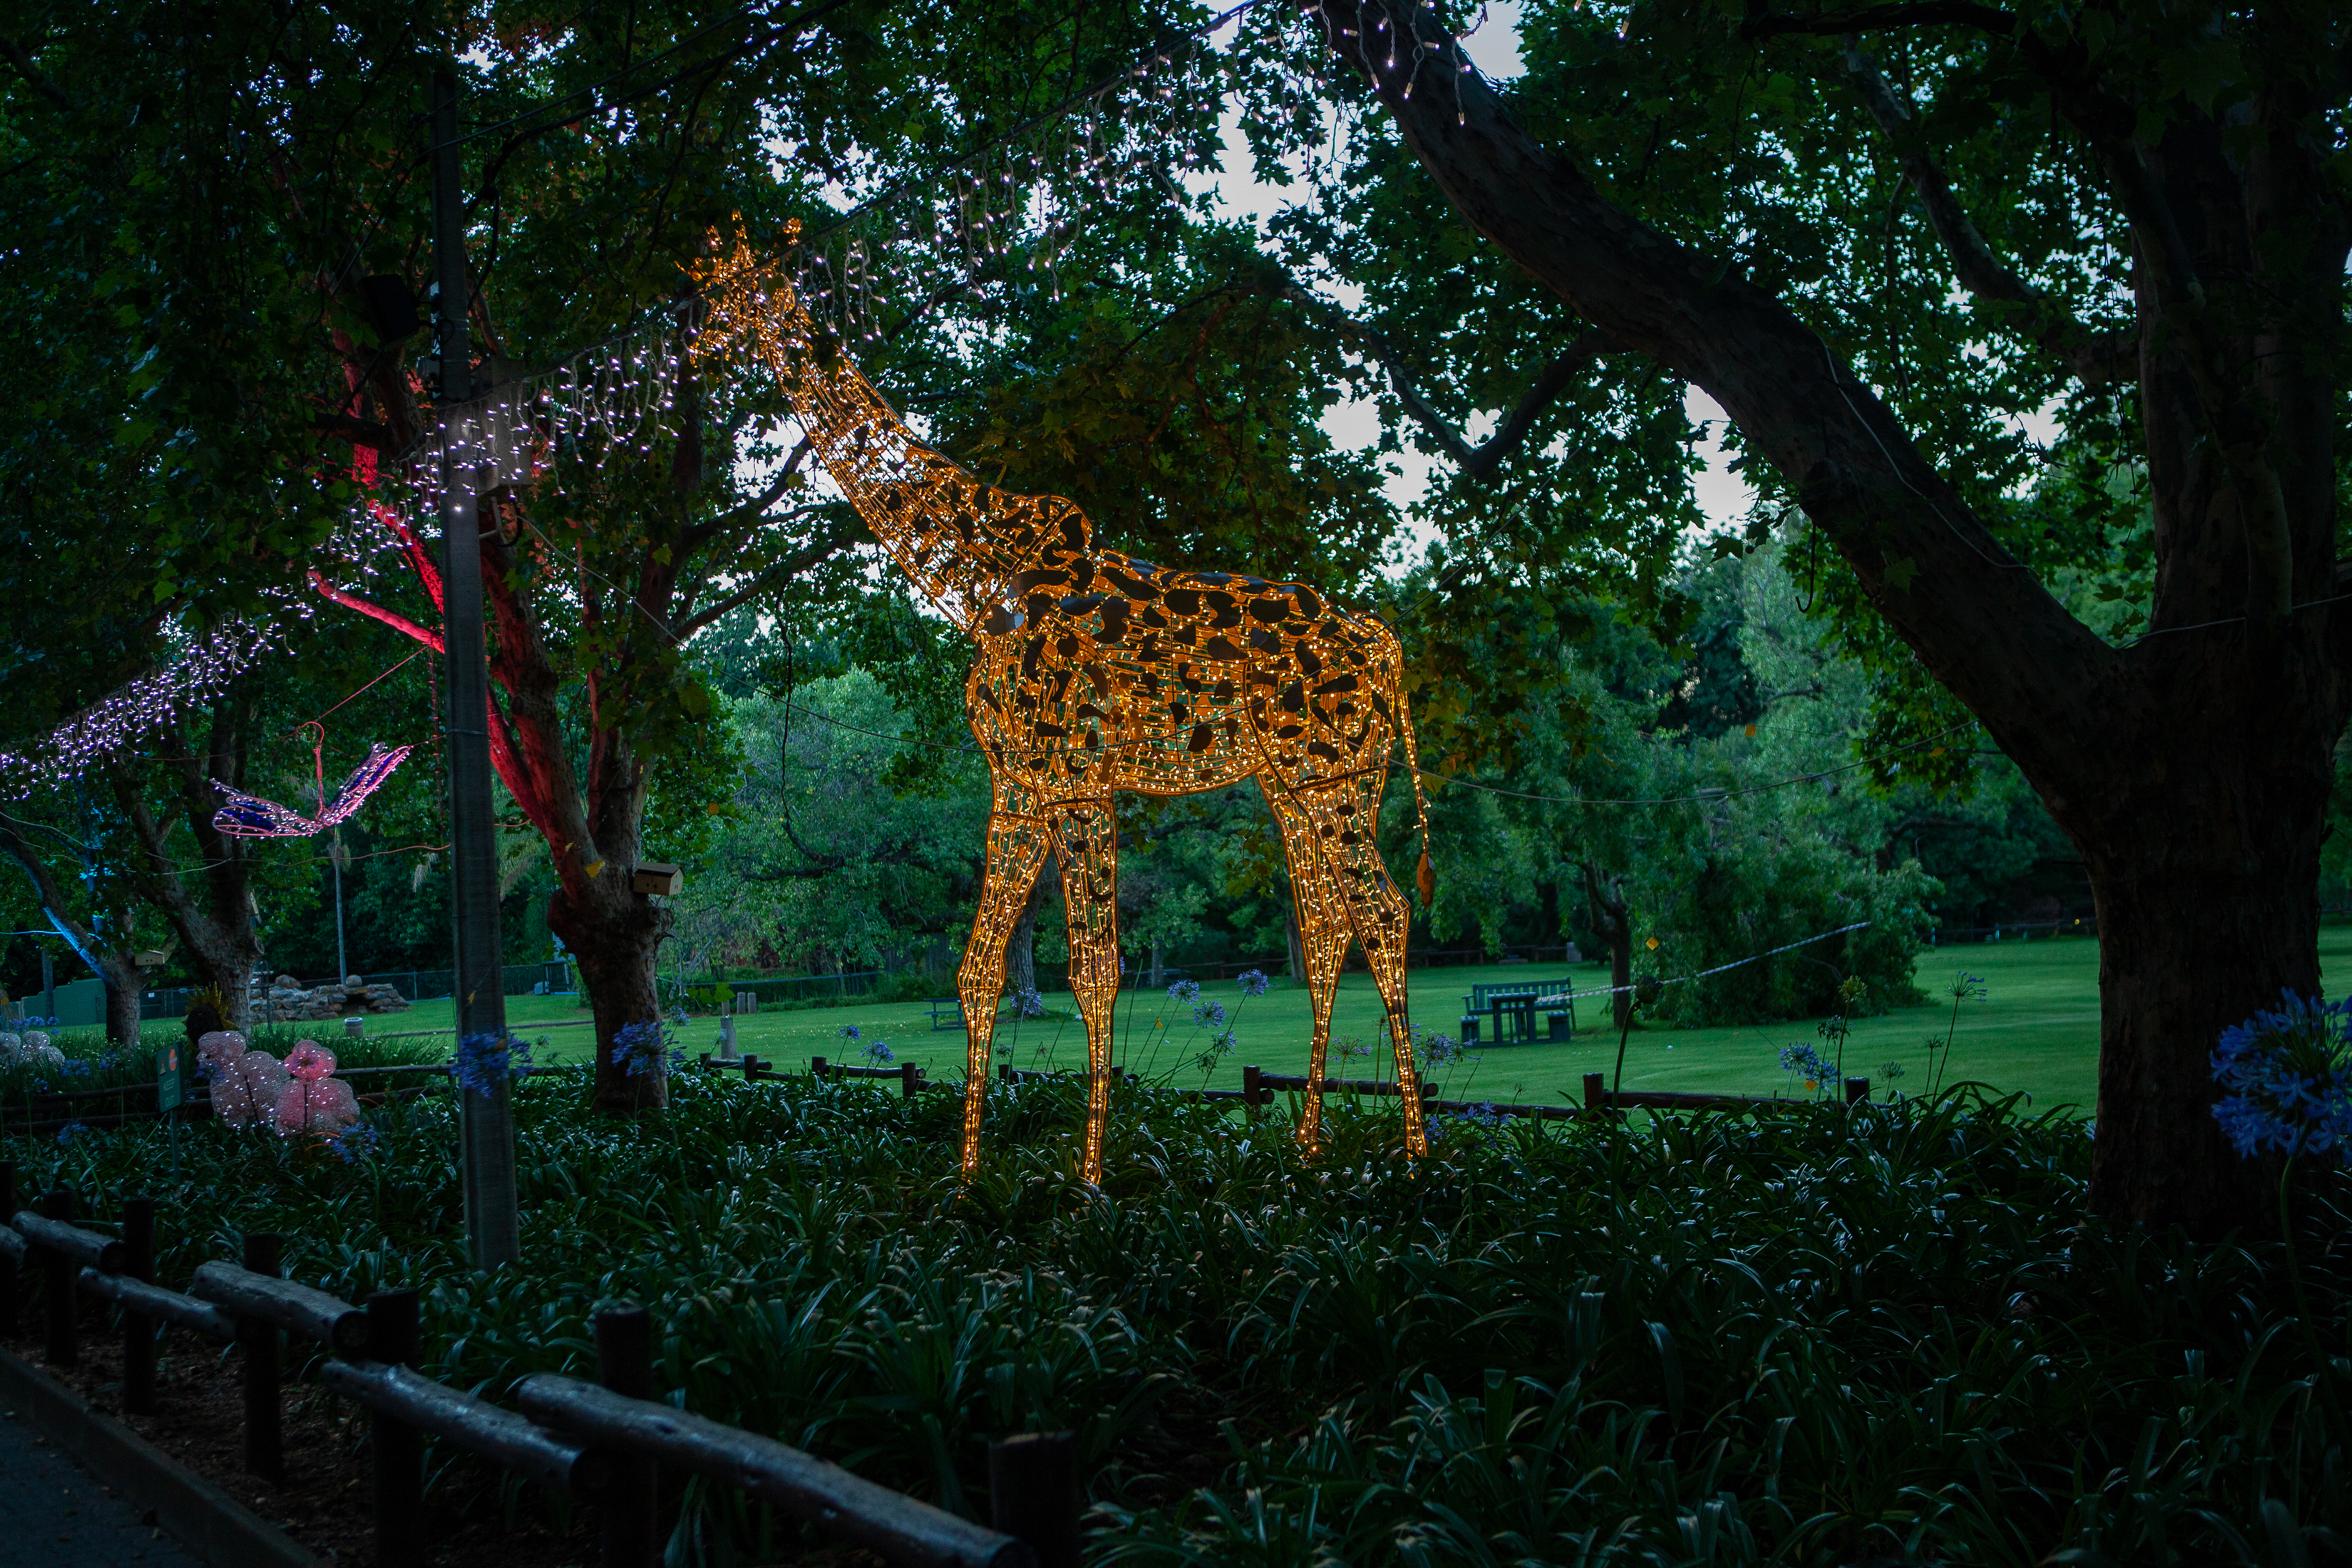 JOHANNESBURG, SOUTH AFRICA - DECEMBER 14: Magical Festival of Lights at the Joburg Zoo on December 14, 2021 in Johannesburg, South Africa. The Joburg Zoo hosted the event in partnership with the Joburg Theatre and City Power. (Photo by Gallo Images/Papi Morake)